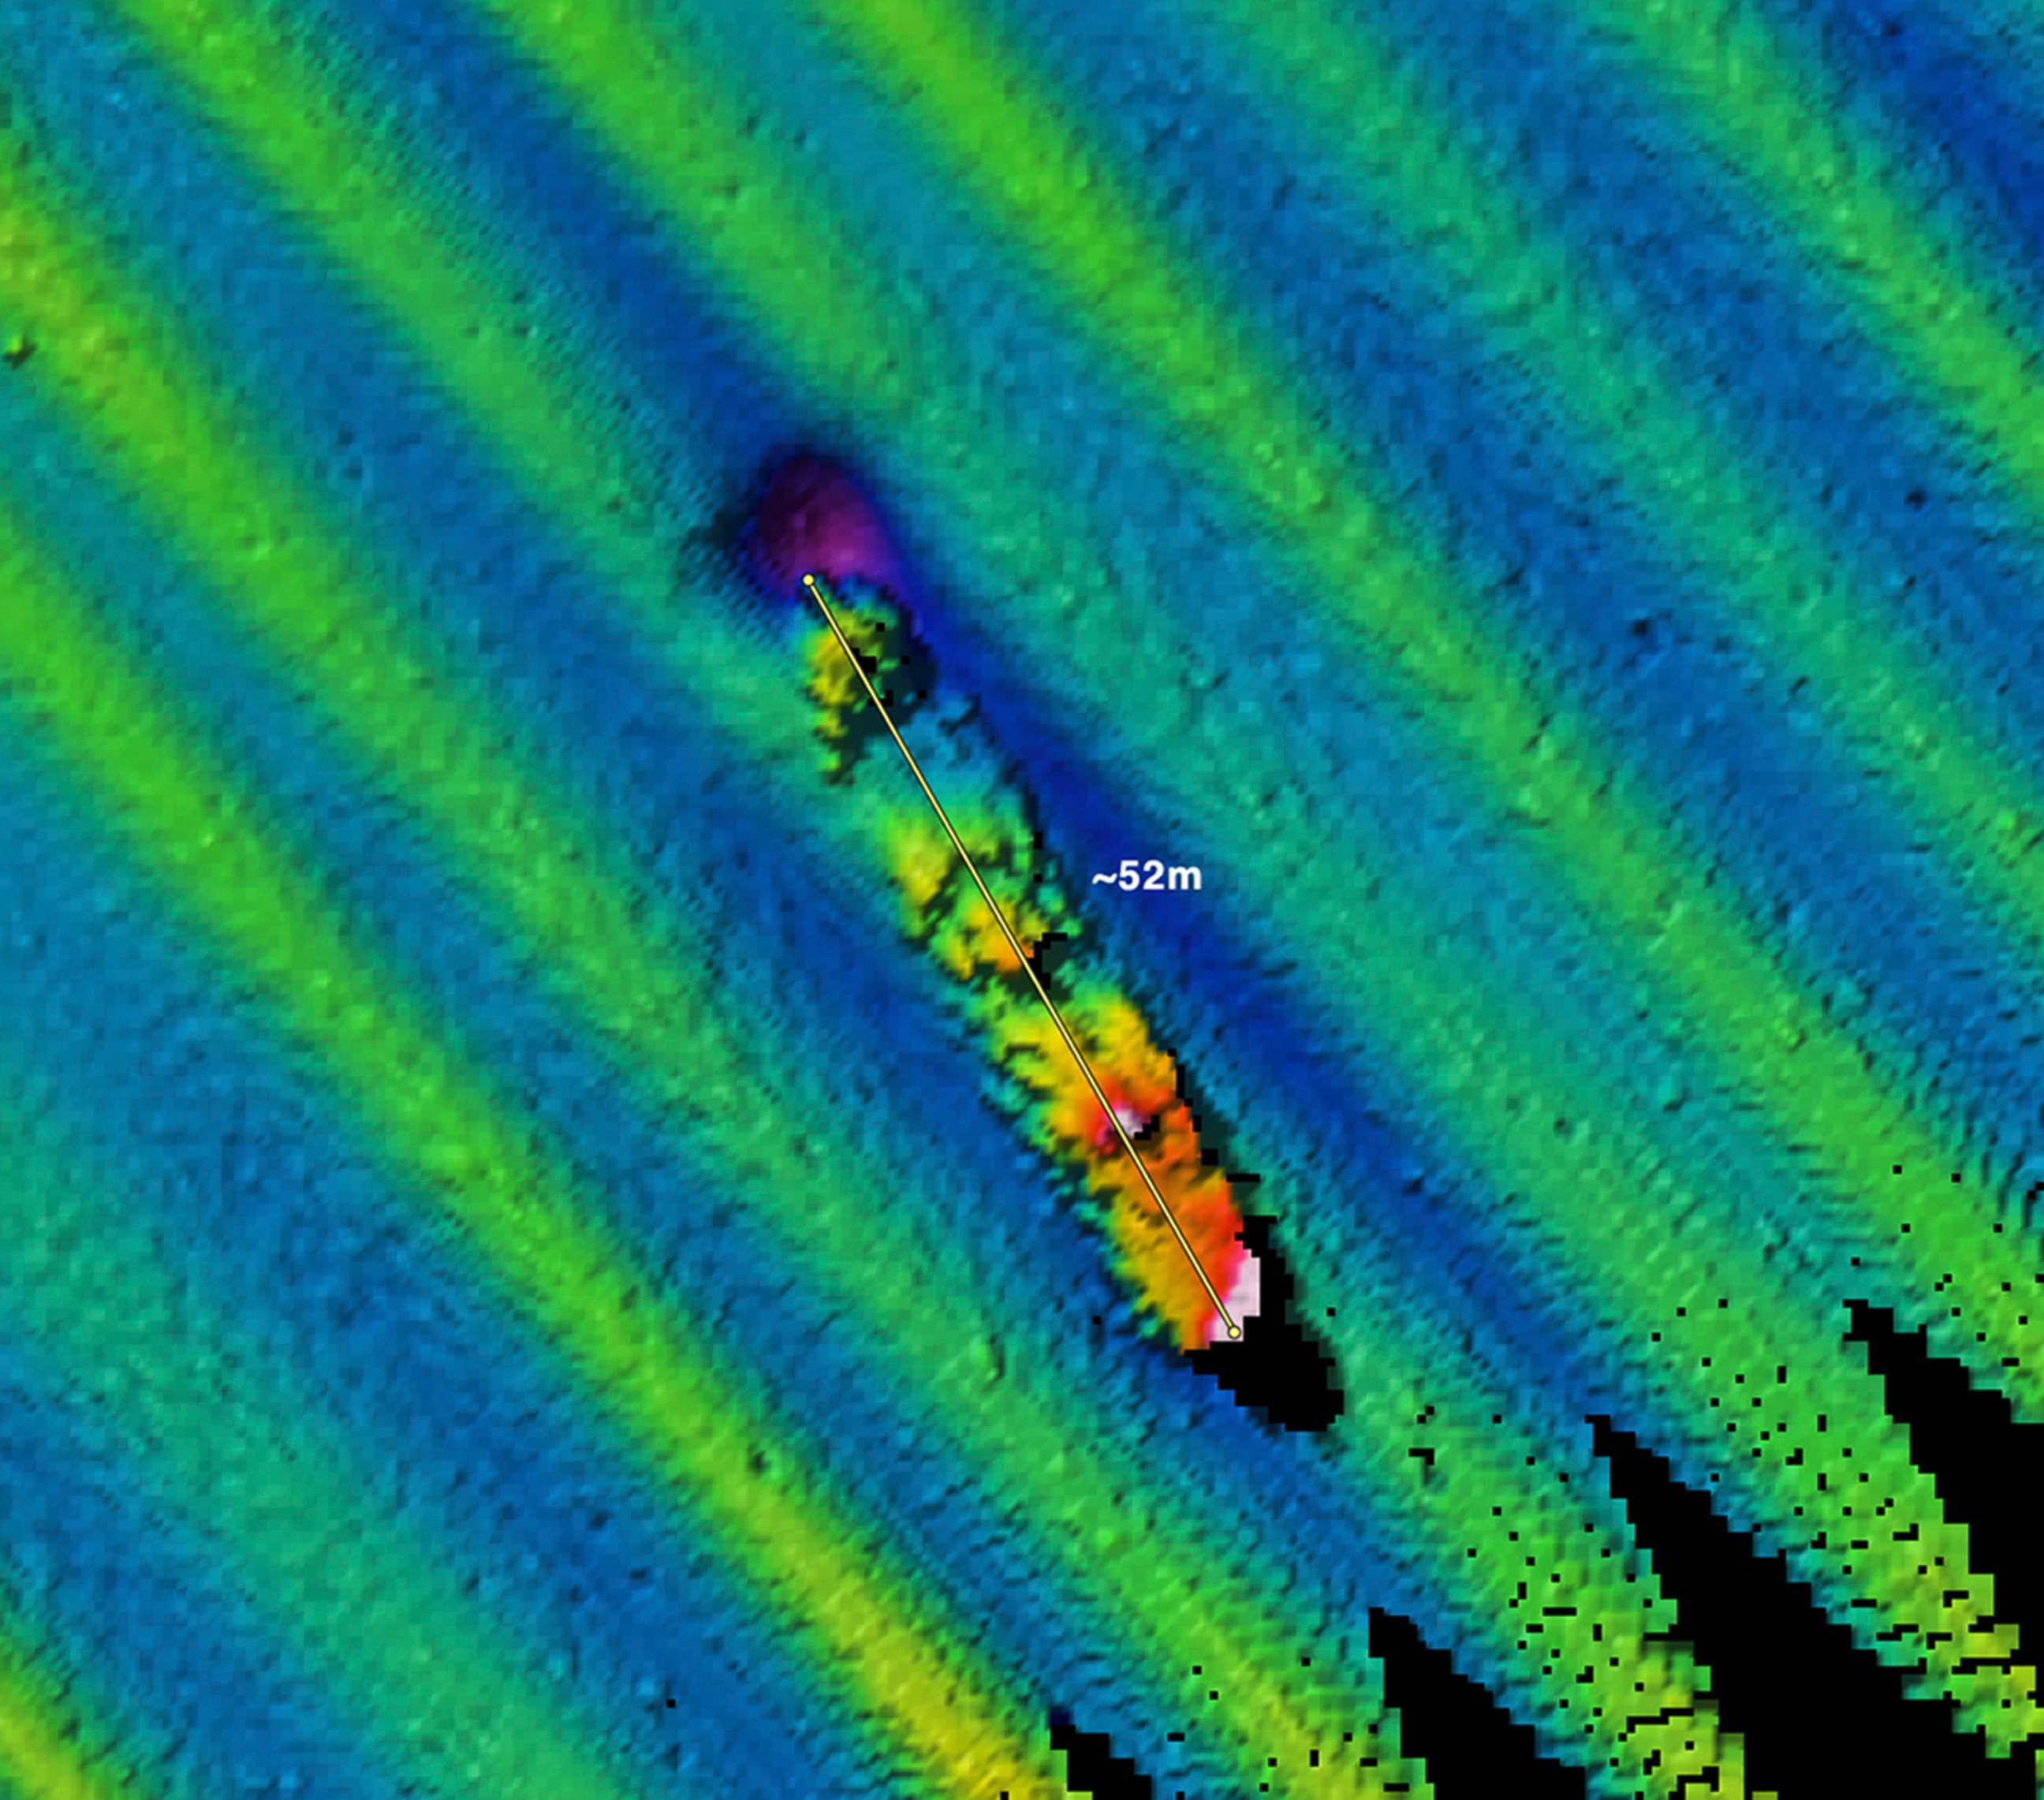 PHOTO:In September 2009, a NOAA/Fugro multibeam sonar survey of the area around Farallon Islands documented a probable shipwreck with an estimated length of 52m (170ft) at a depth of 56.5m (185ft).  